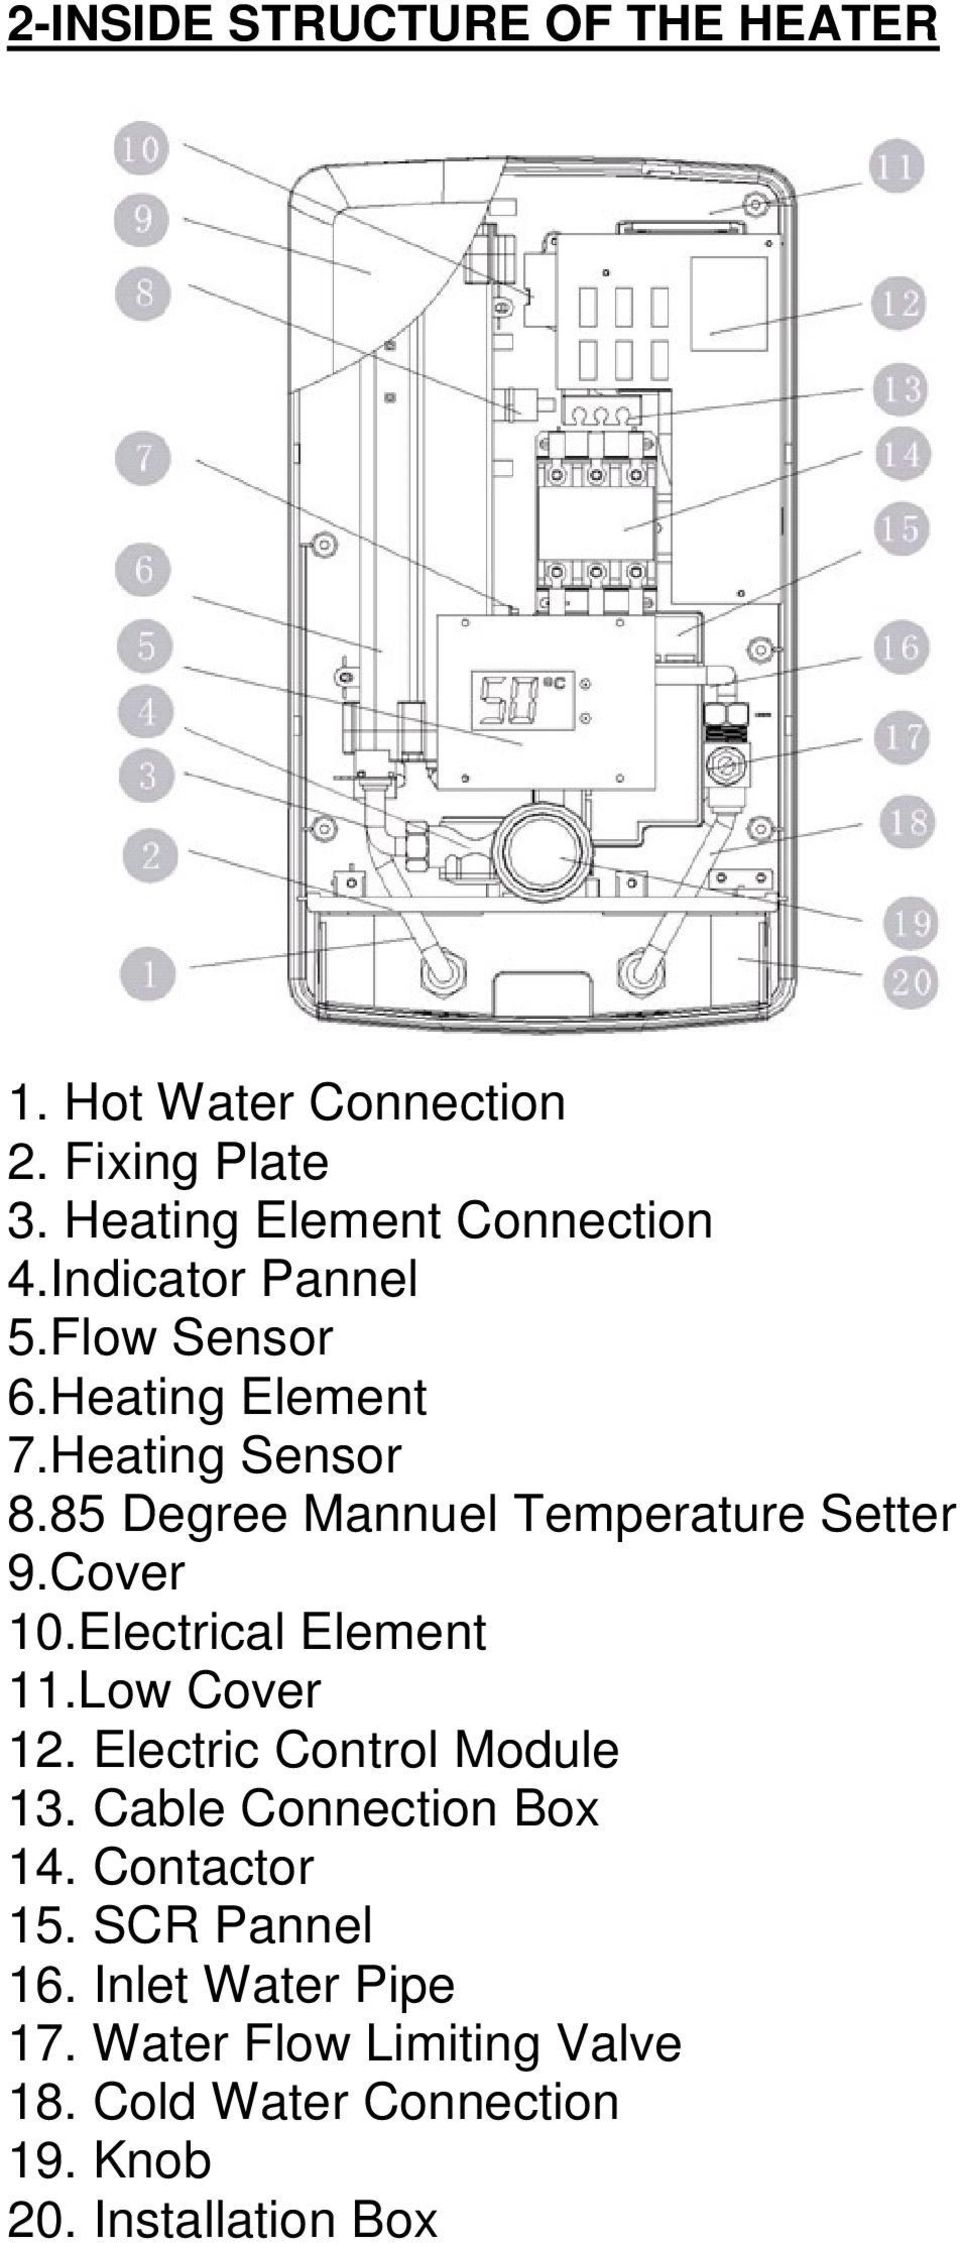 Cover 10.Electrical Element 11.Low Cover 12. Electric Control Module 13. Cable Connection Box 14. Contactor 15.